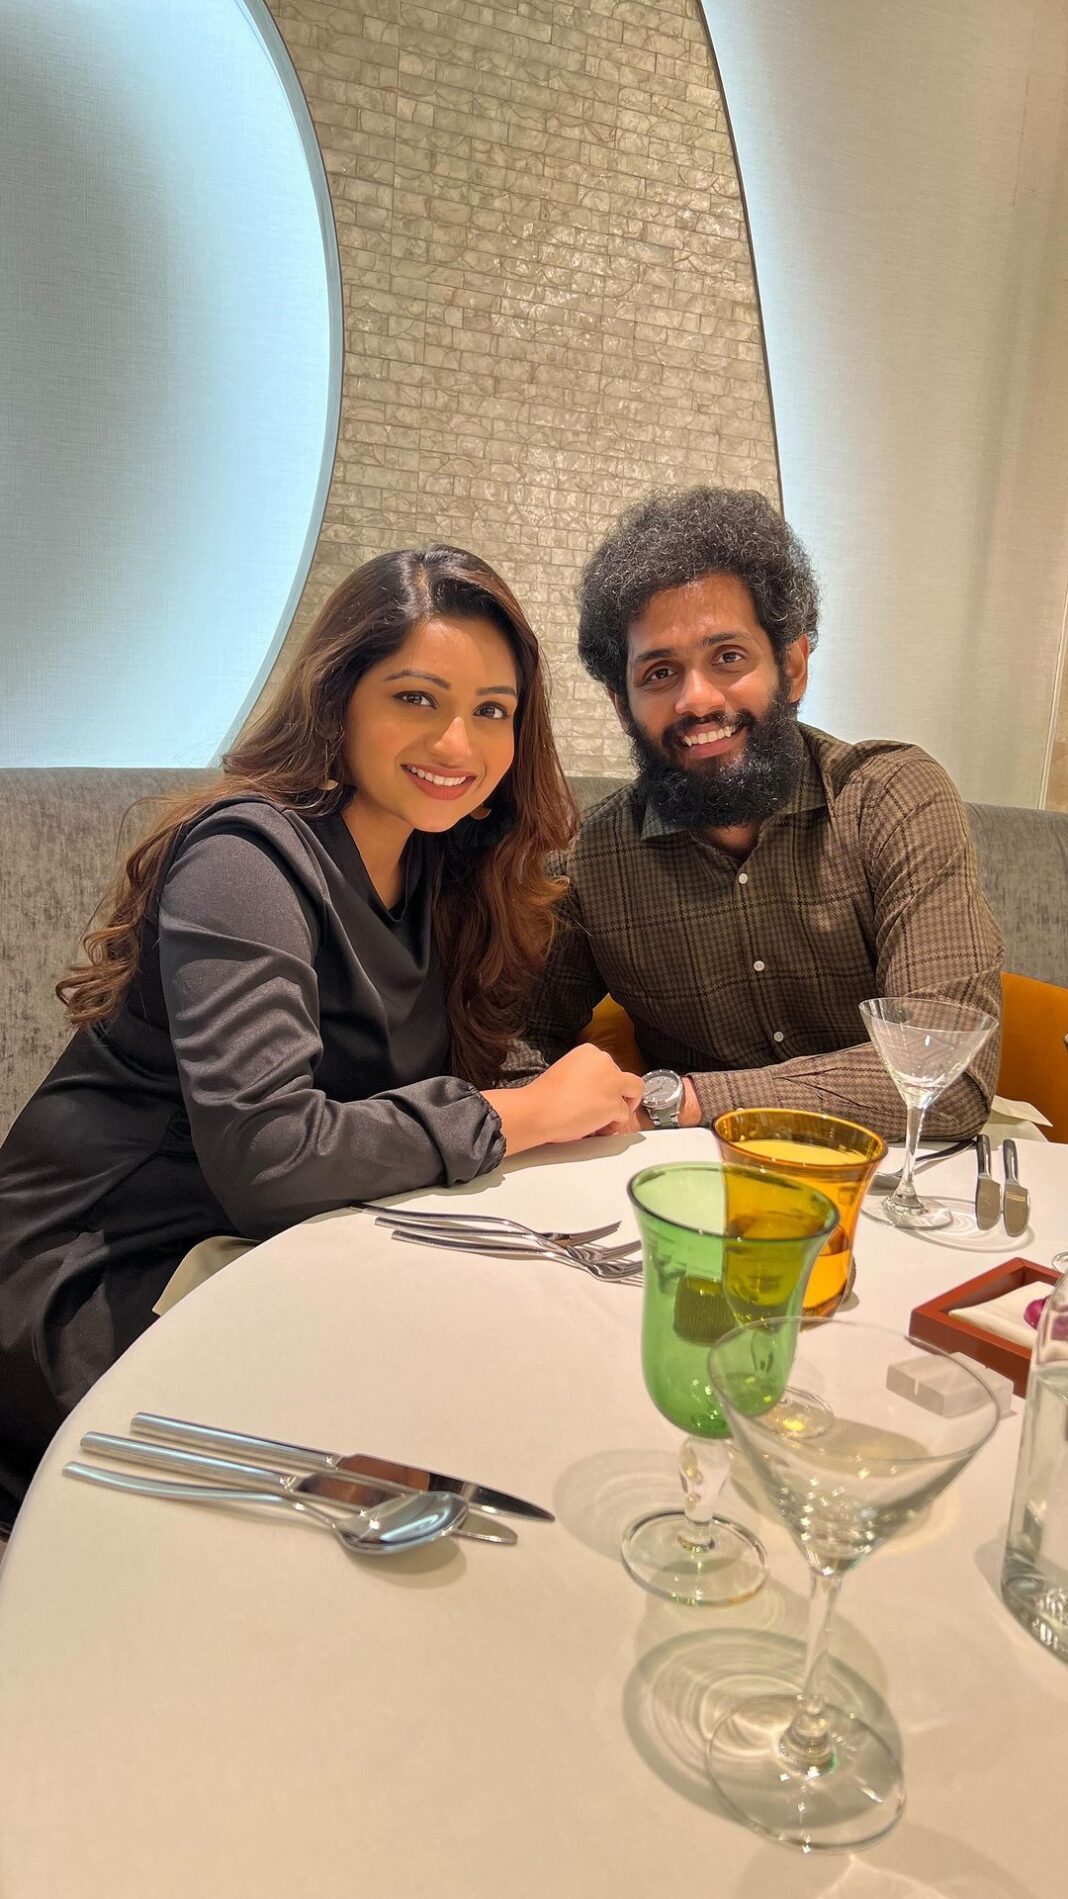 Nakshathra Nagesh Instagram - 5 months of being married! Not just Raghav being married to Nakshathra, but our families being married to each other! This has honestly been the best 5 months of my life 🙌🏼 We celebrated with a super cozy dinner date with pretty lights, lots of photos and videos, conversations and apparently very exquisite food! I didn’t understand it because my heart always gravitates towards wholesome yummy meals, but #YOLO ✌🏼 #NakshufoundherRagha #monthiversary